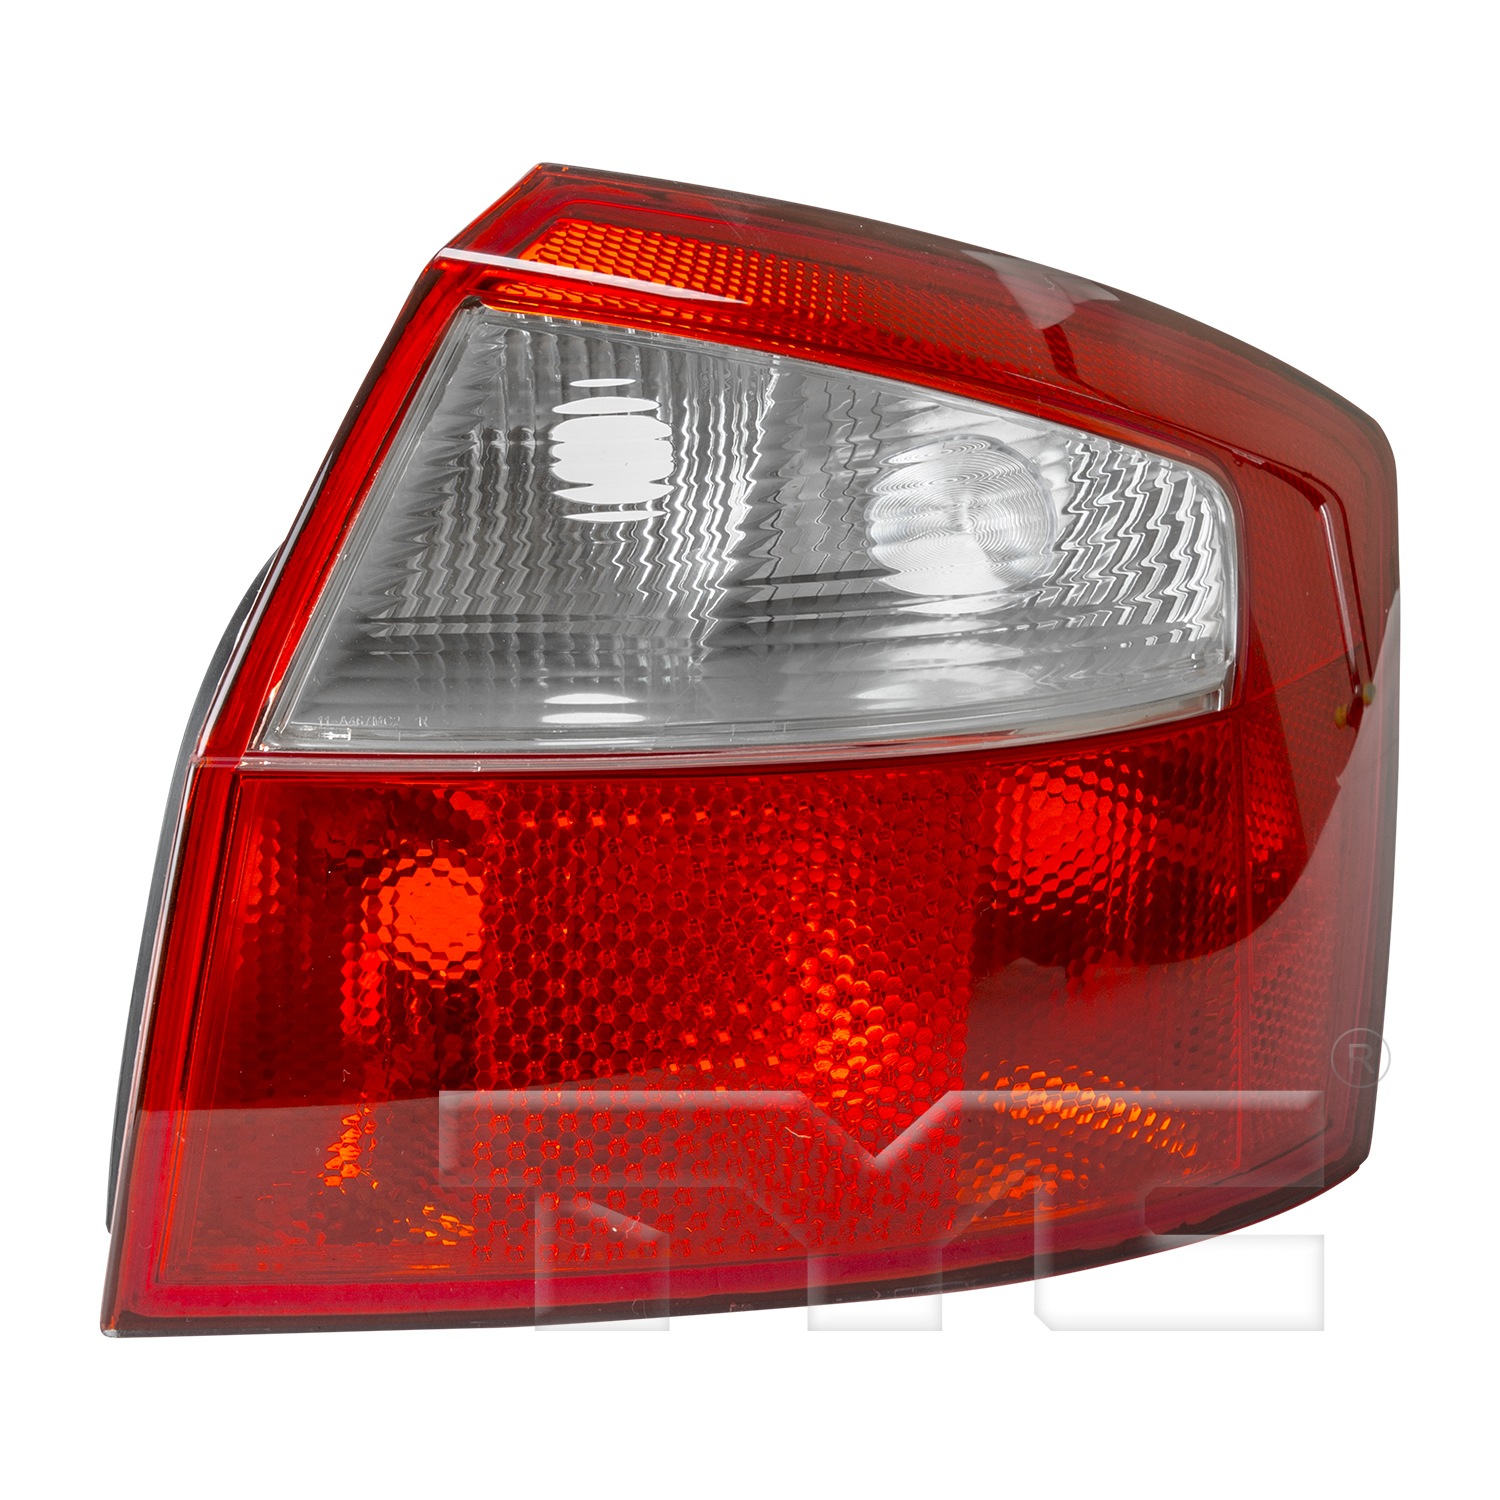 Aftermarket TAILLIGHTS for AUDI - S4, S4,02-05,RT Taillamp lens/housing